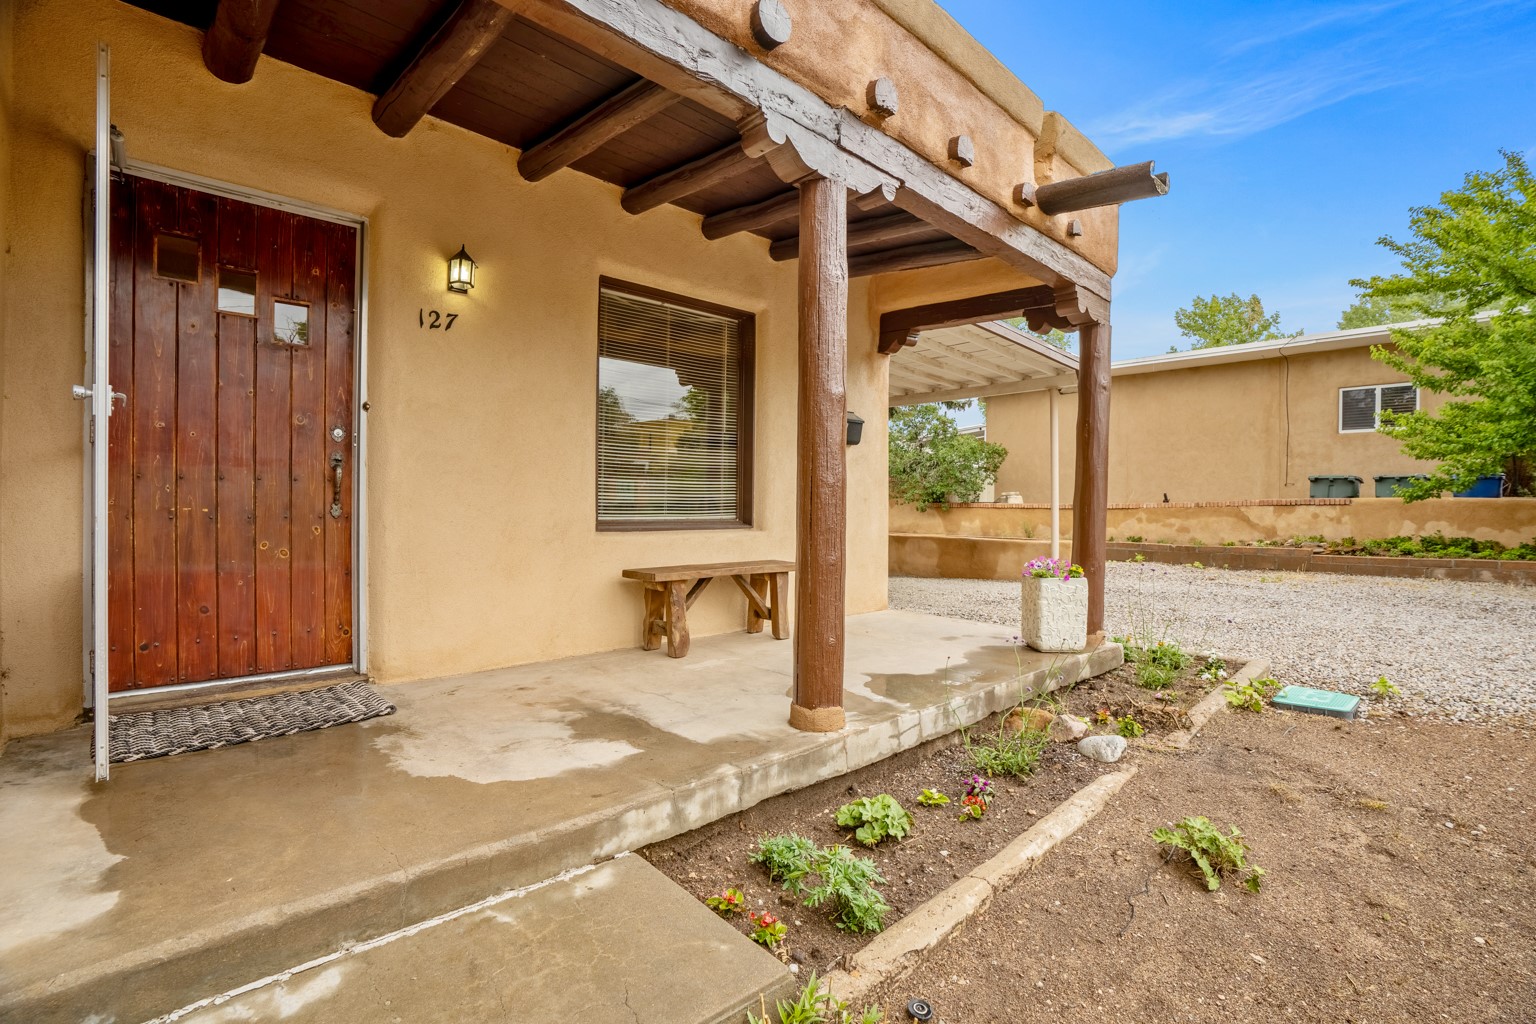 127 W Houghton, Santa Fe, New Mexico 87505, 3 Bedrooms Bedrooms, ,2 BathroomsBathrooms,Residential,For Sale,127 W Houghton,202232175